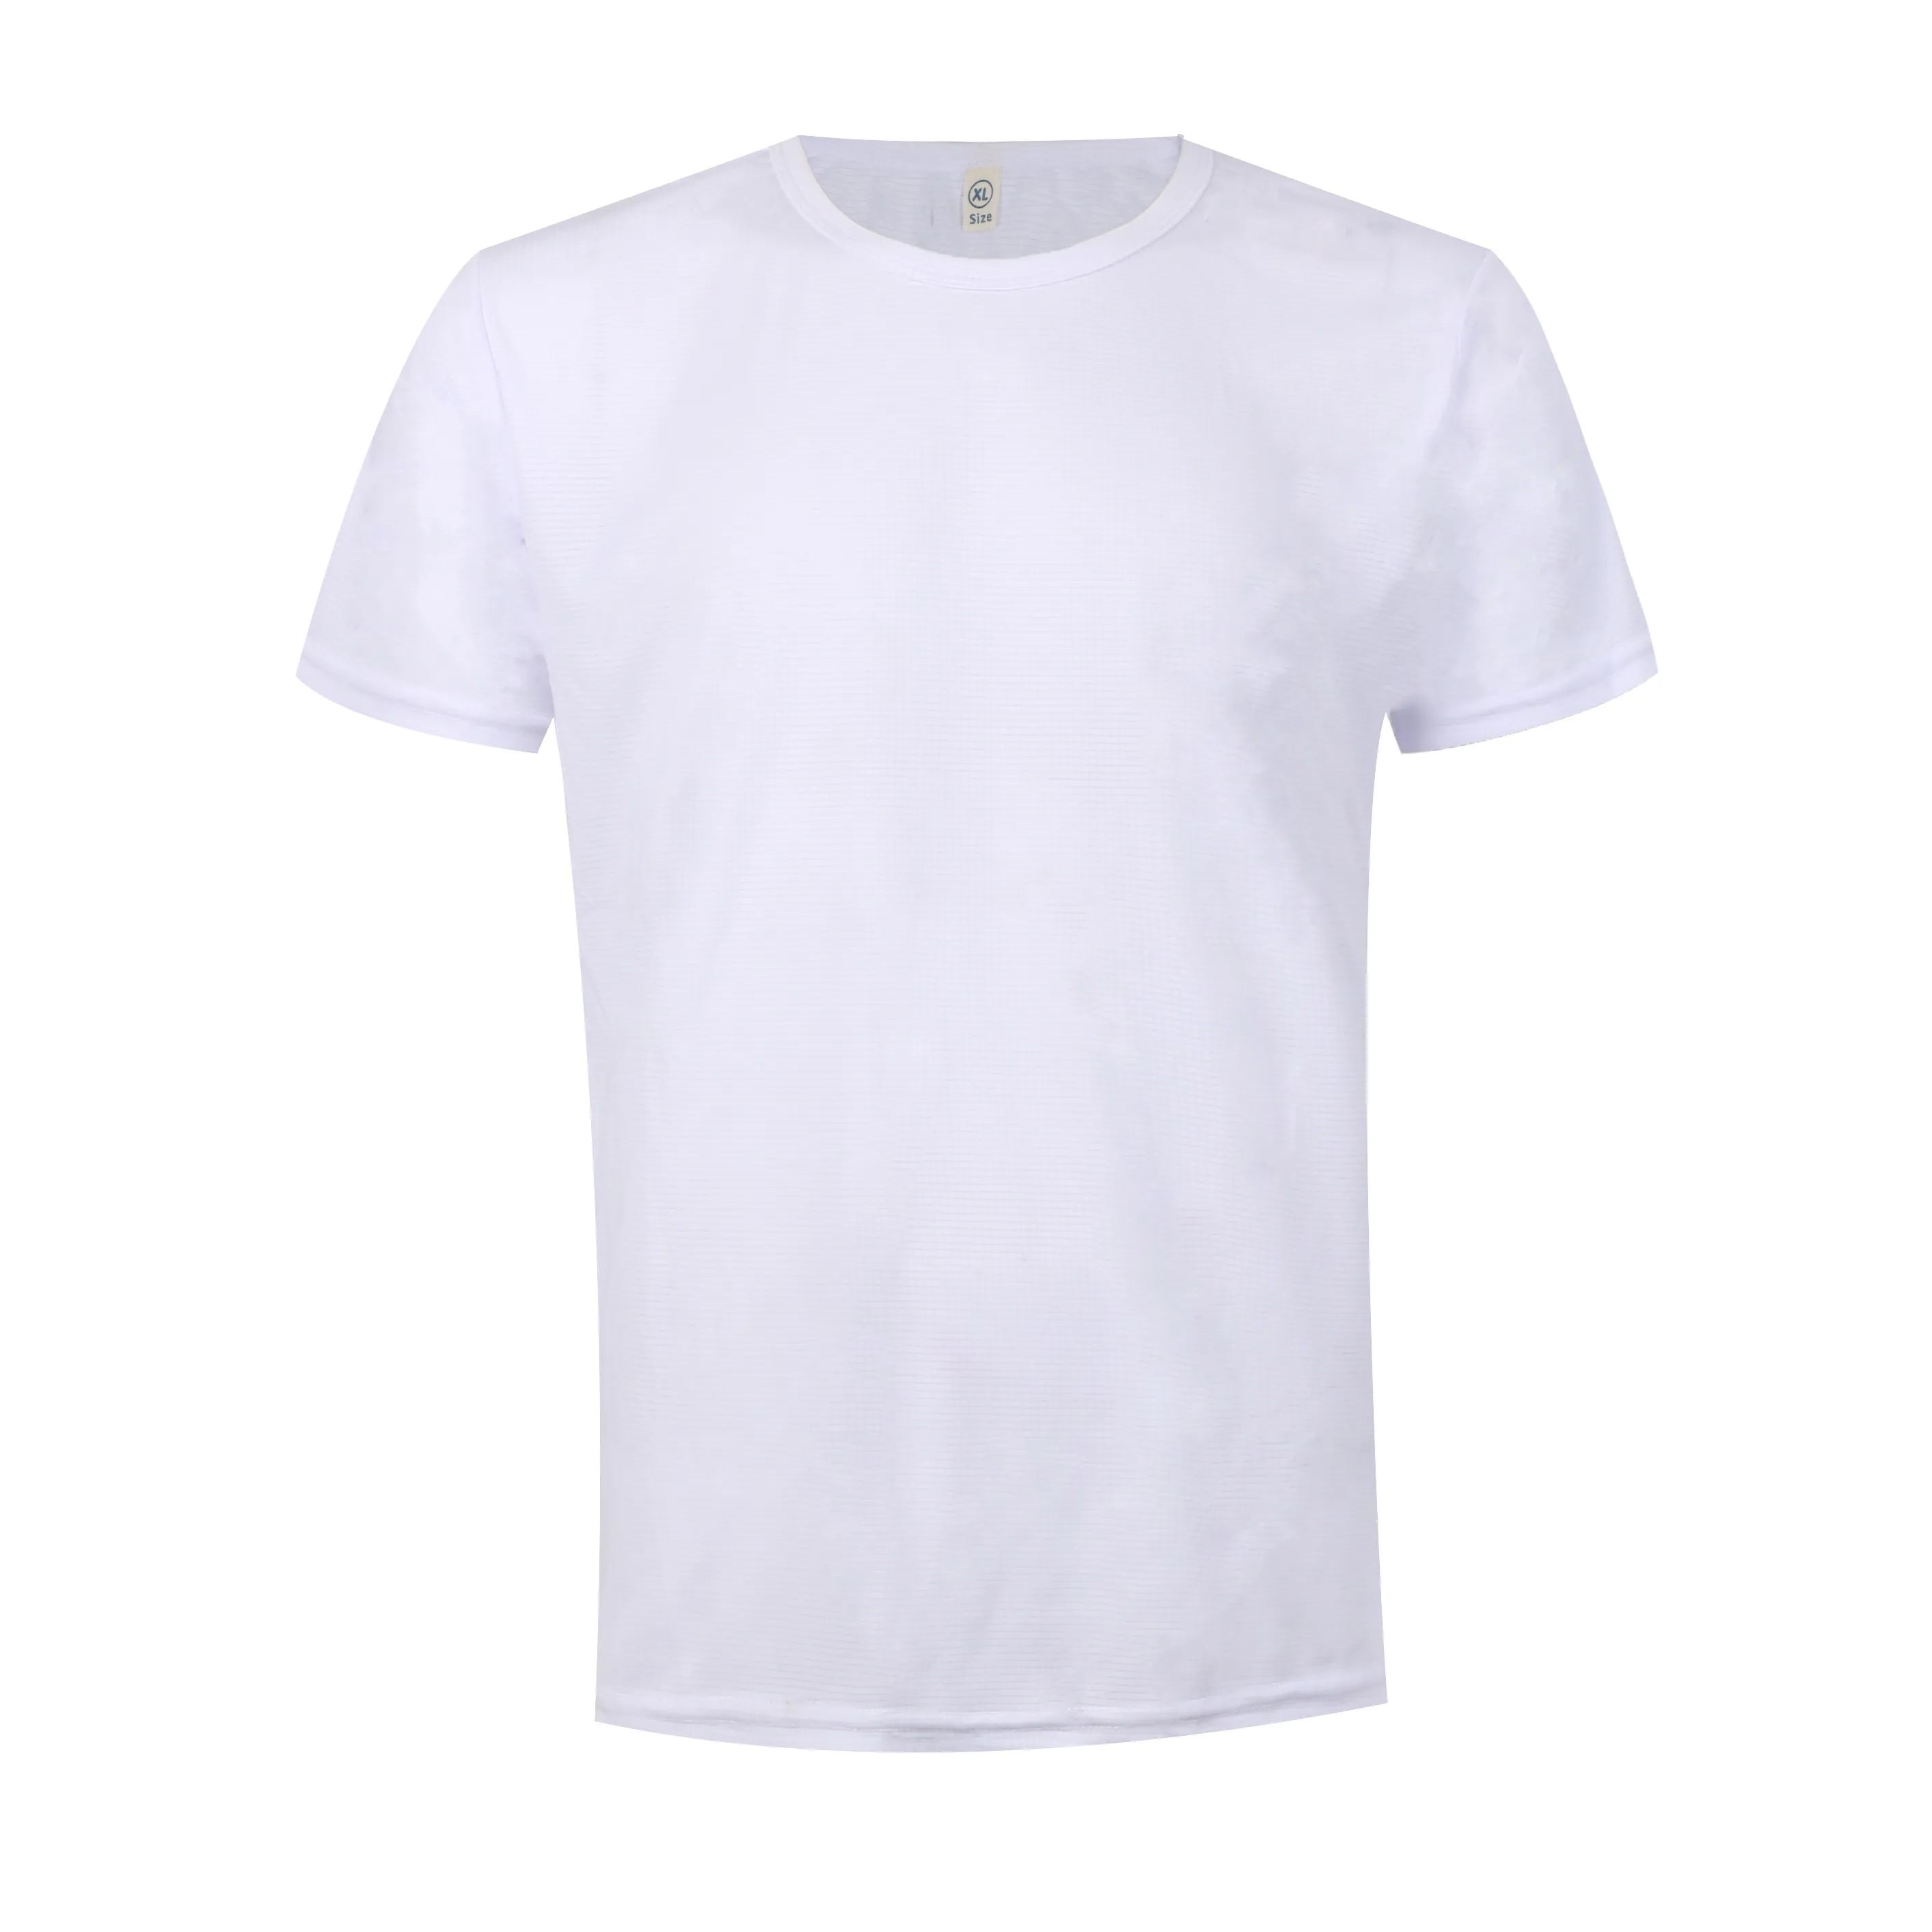 Wholesale printed custom t-shirt white sports quick-drying men's t-shirt muscle fit running sports fitness shirt